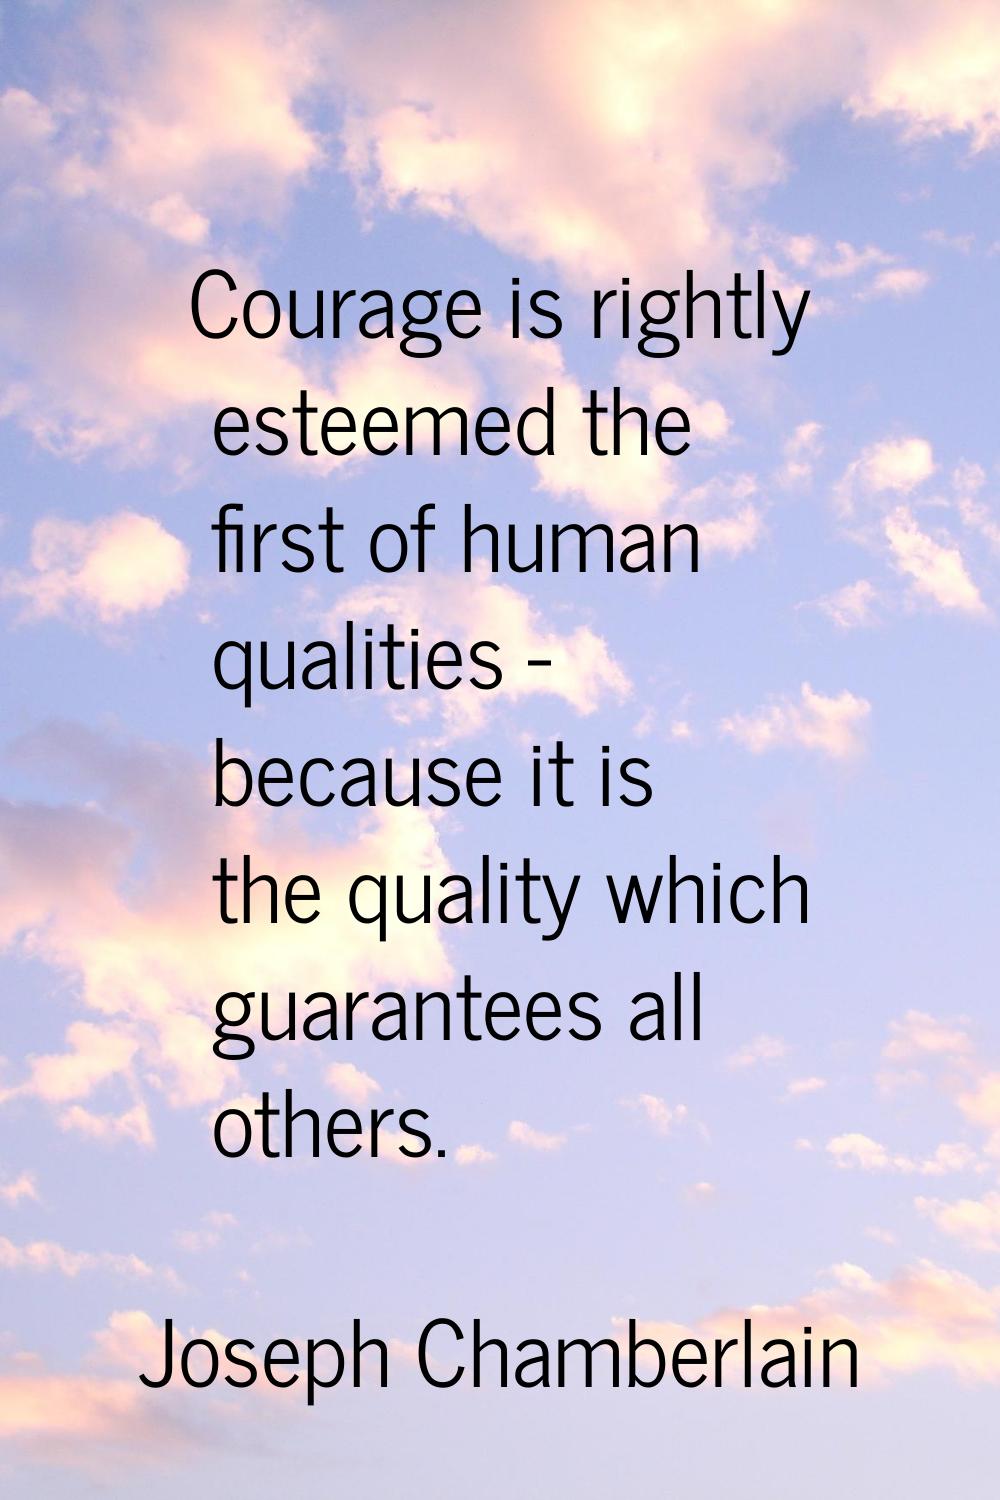 Courage is rightly esteemed the first of human qualities - because it is the quality which guarante